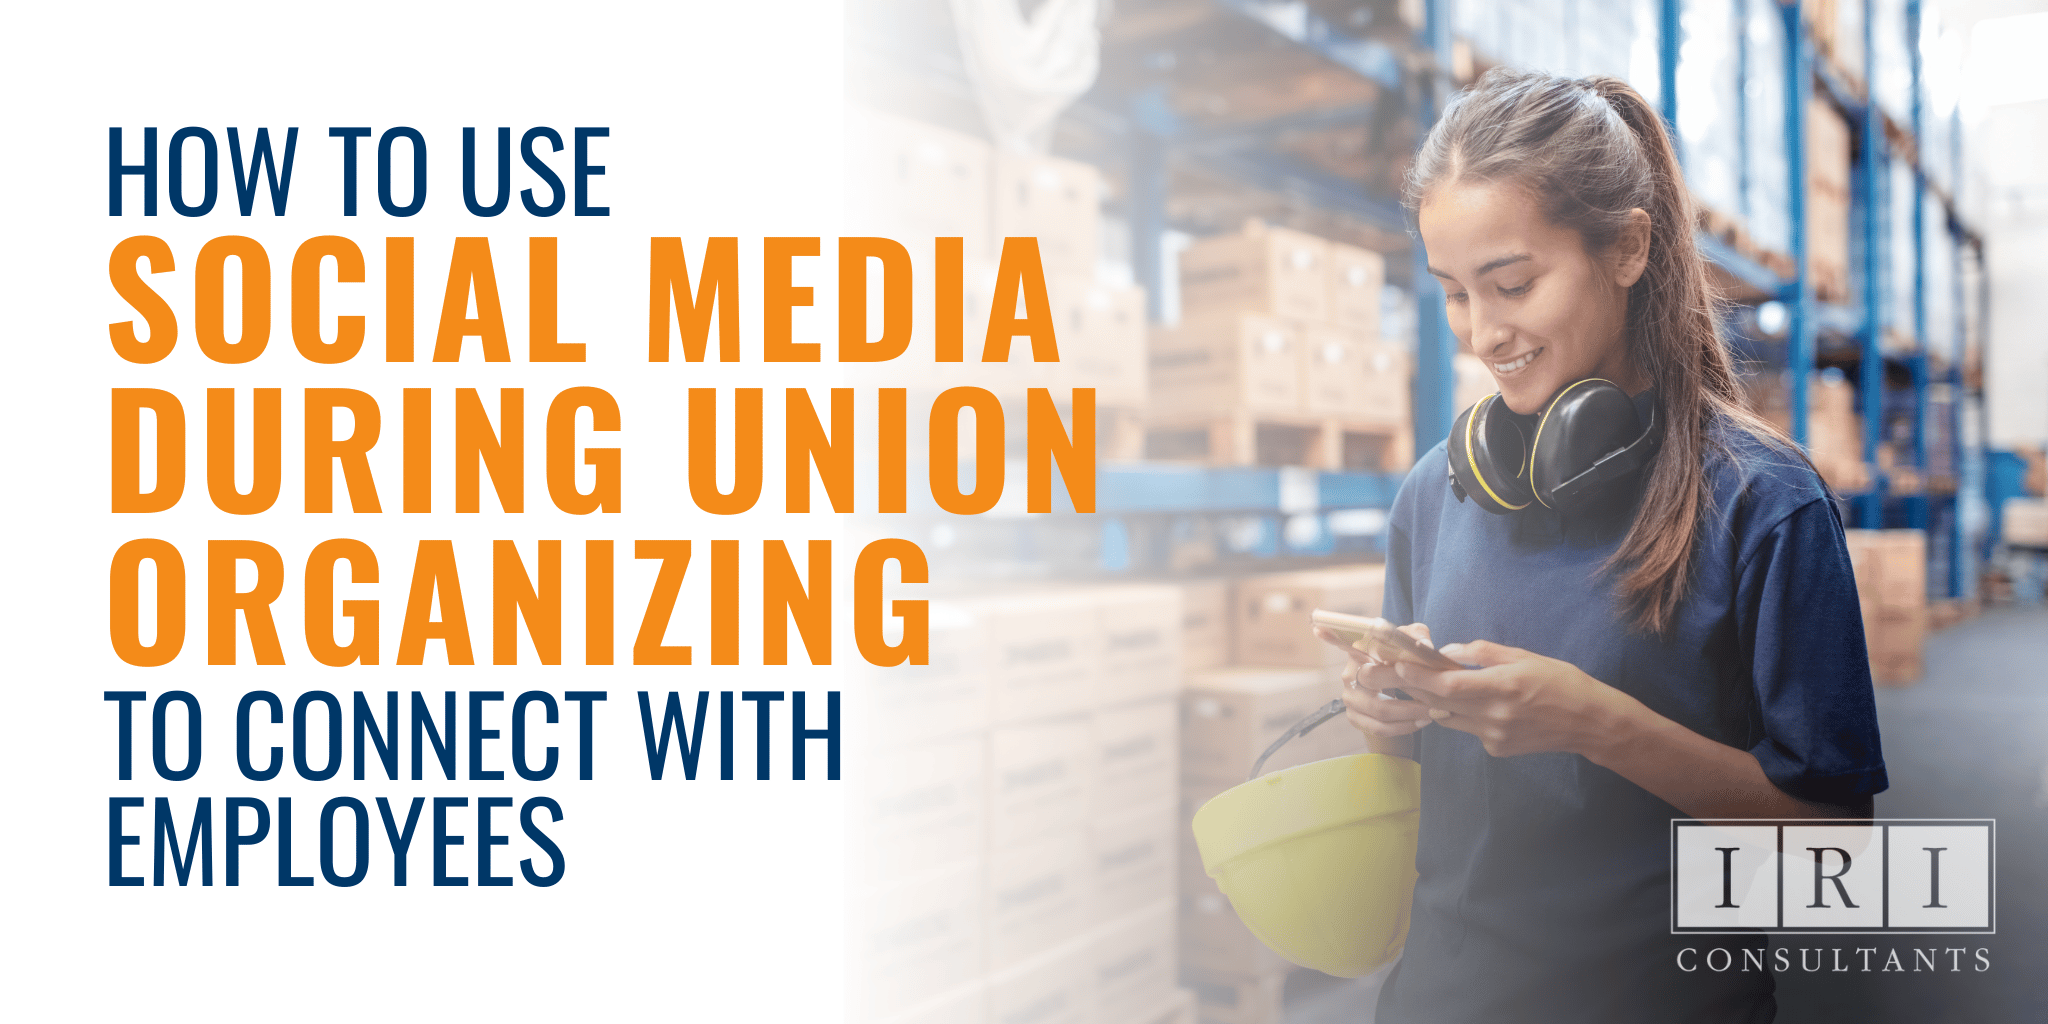 How To Use Social Media During Union Organizing To Connect With Employees